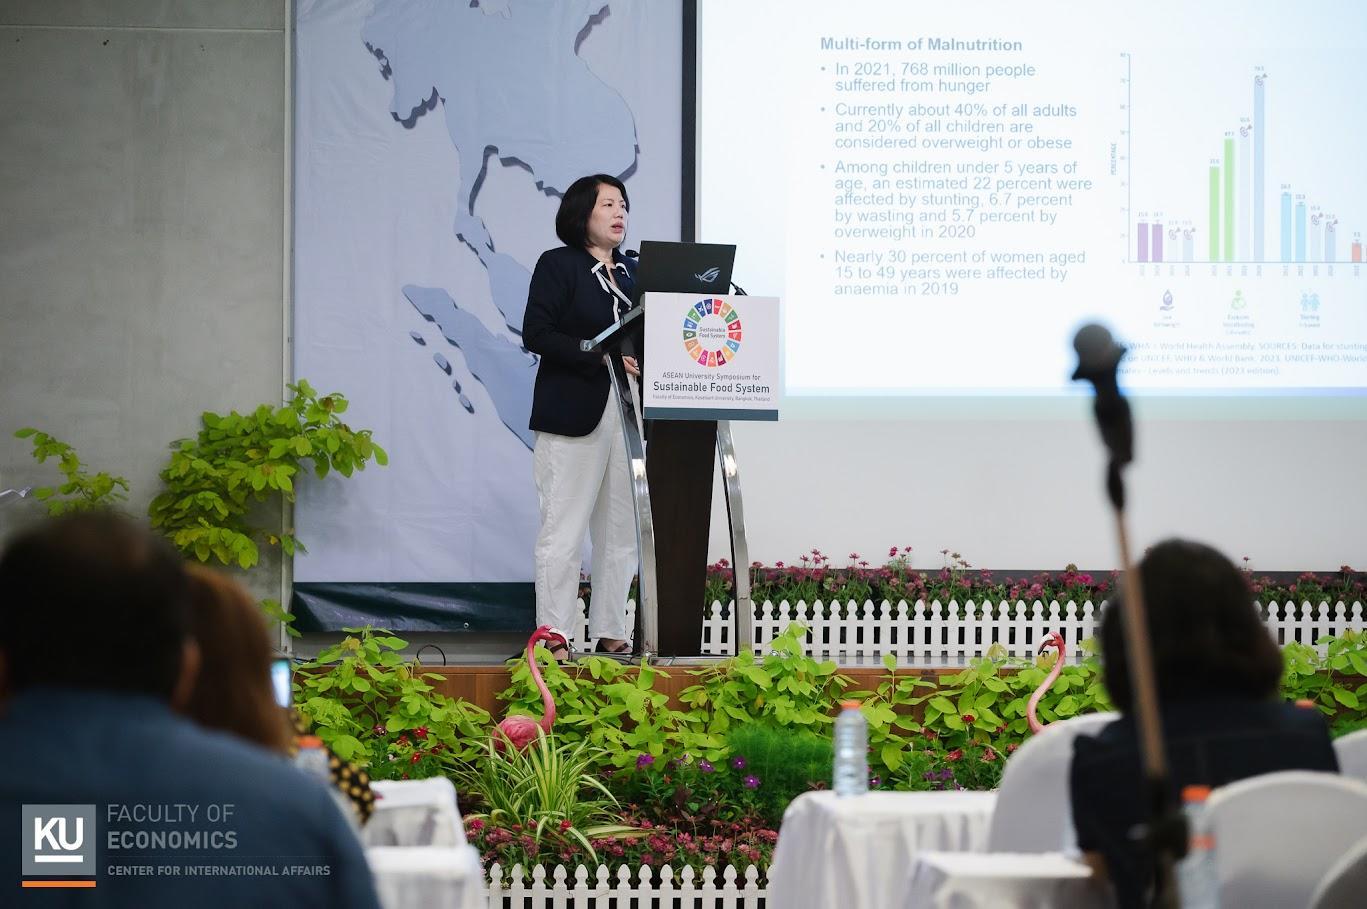 Highlighting the Alliance and ASEAN-CGIAR’s food systems transformation efforts in ASEAN University Symposium - Alliance Bioversity International - CIAT - Image 1